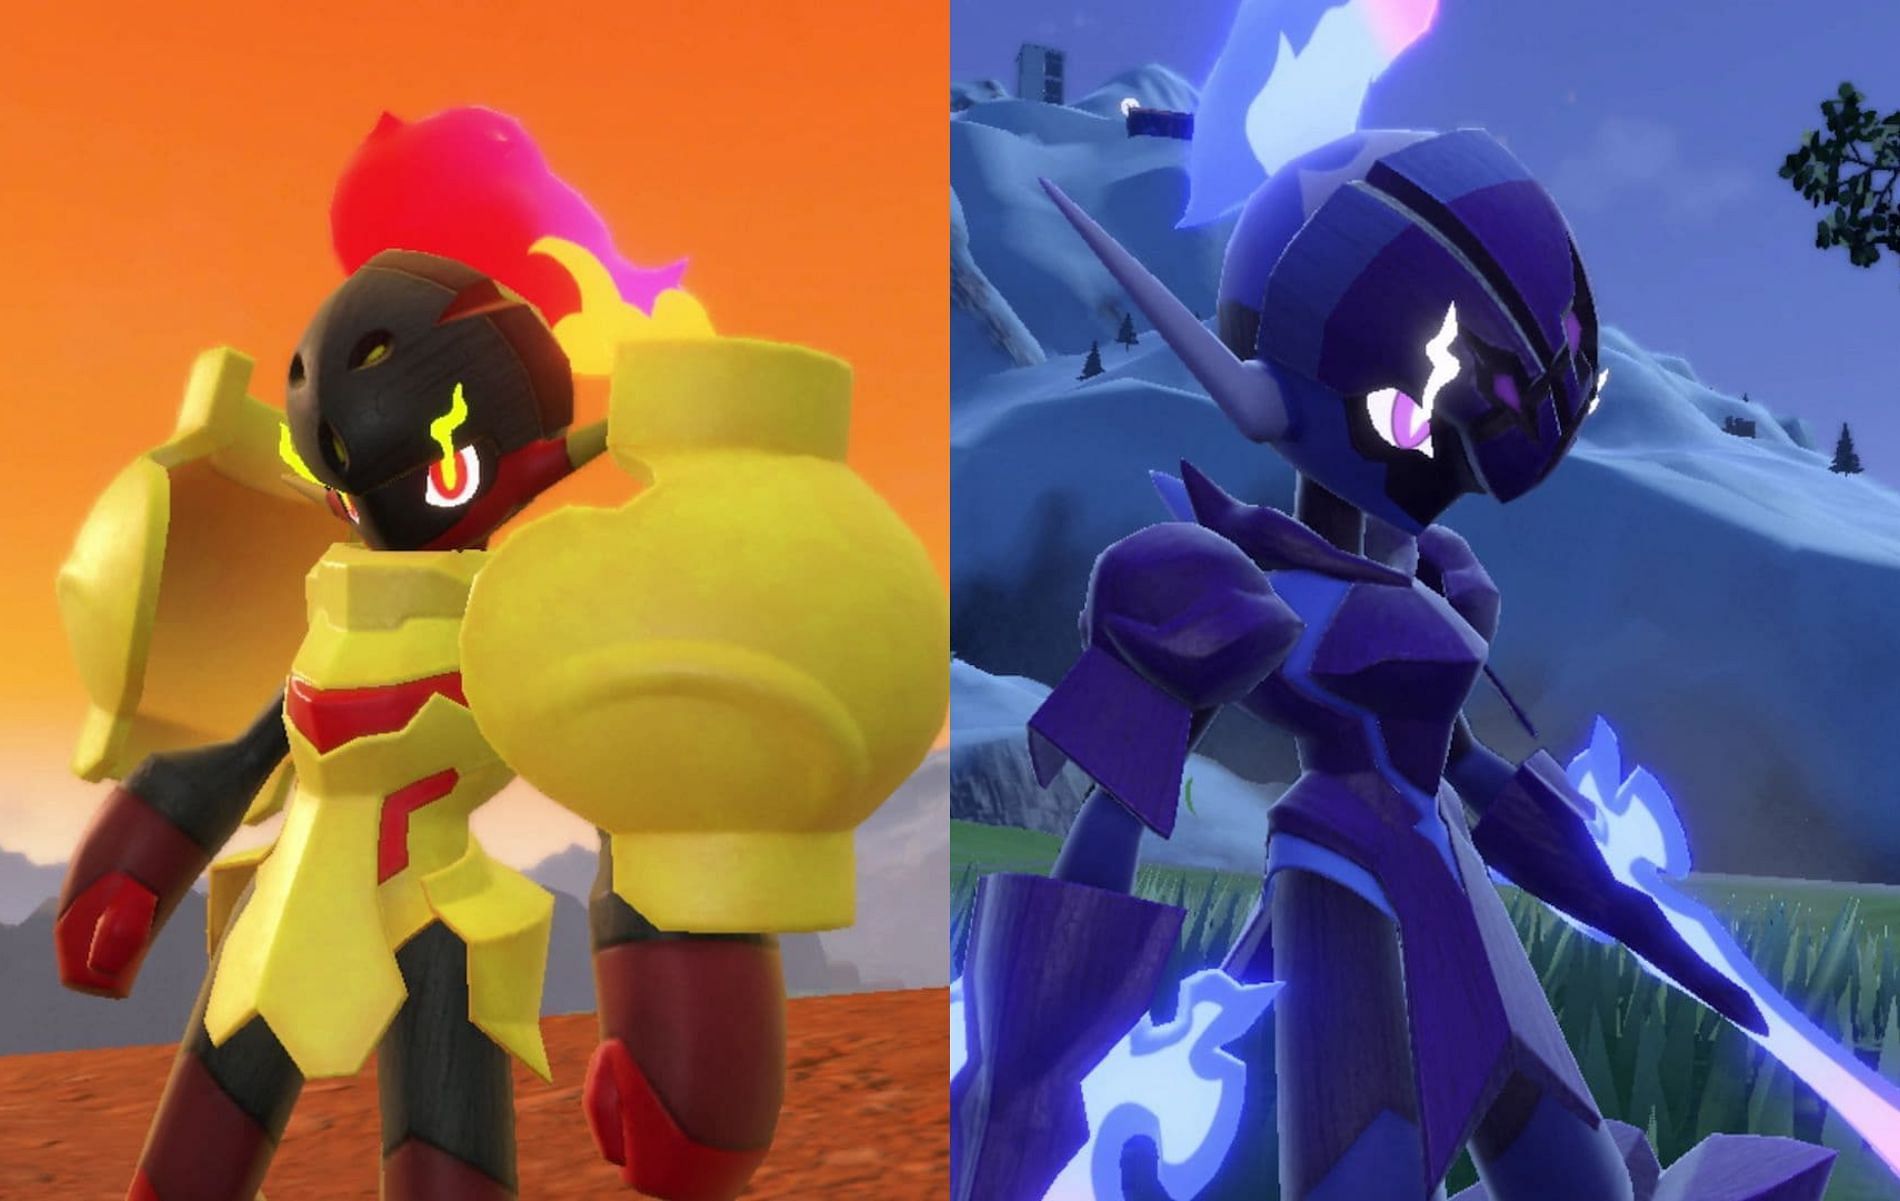 These two are definitely one of the many highlights of the upcoming open-world RPG (Images via The Pokemon Company)